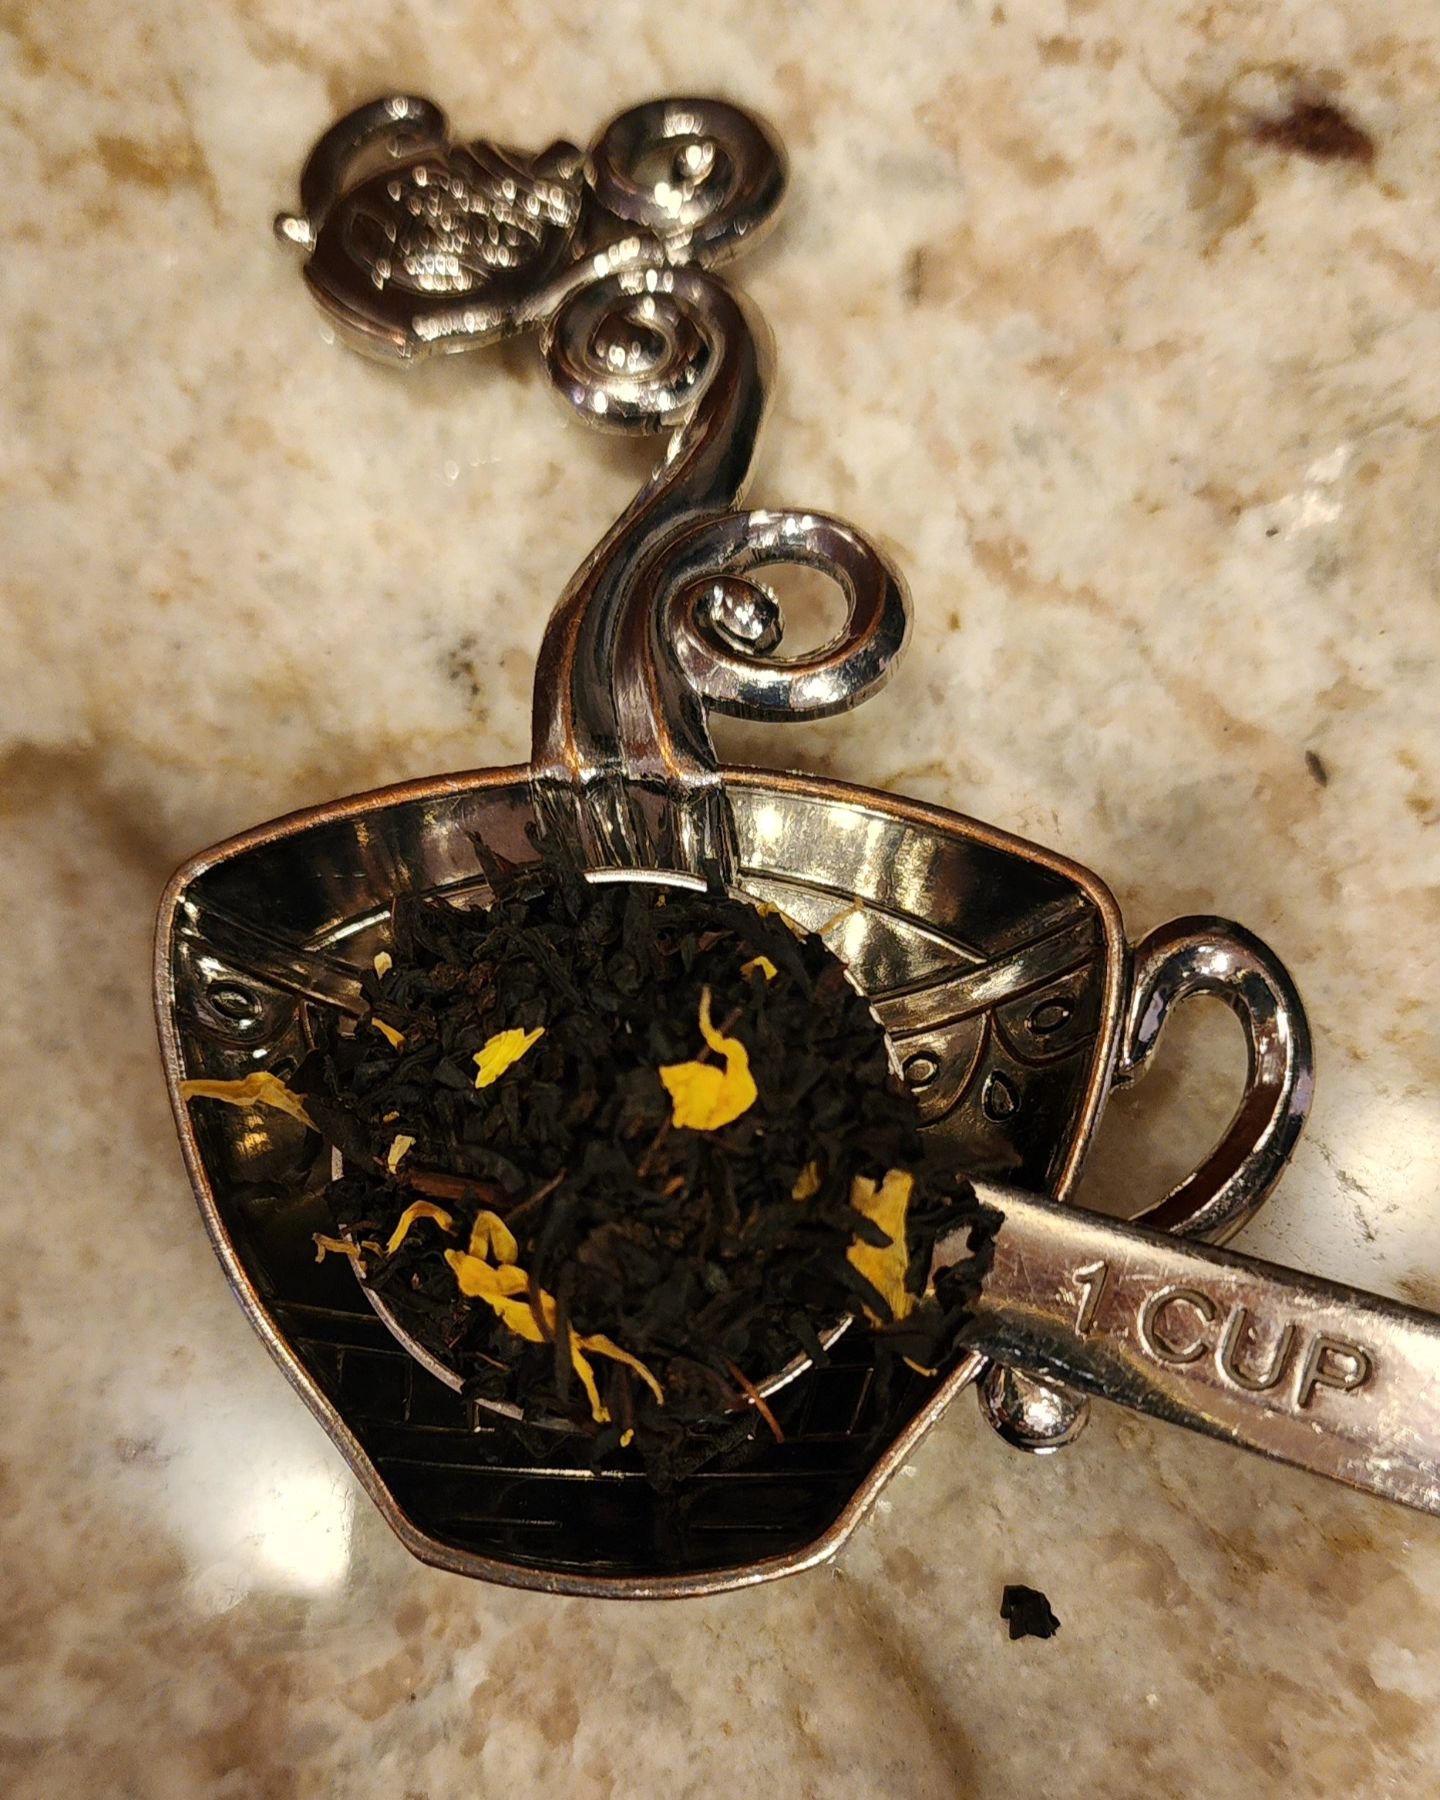 This morning, I'm enjoying a cup of our Maple Leaf tea! It is, after all, the season for making maple syrup. 🍁 ☕️ 

#nwfoodandgifts #uniqueblacktea #tea #shopsmall #shoplocal #willamettevalleywine #willamettevalley